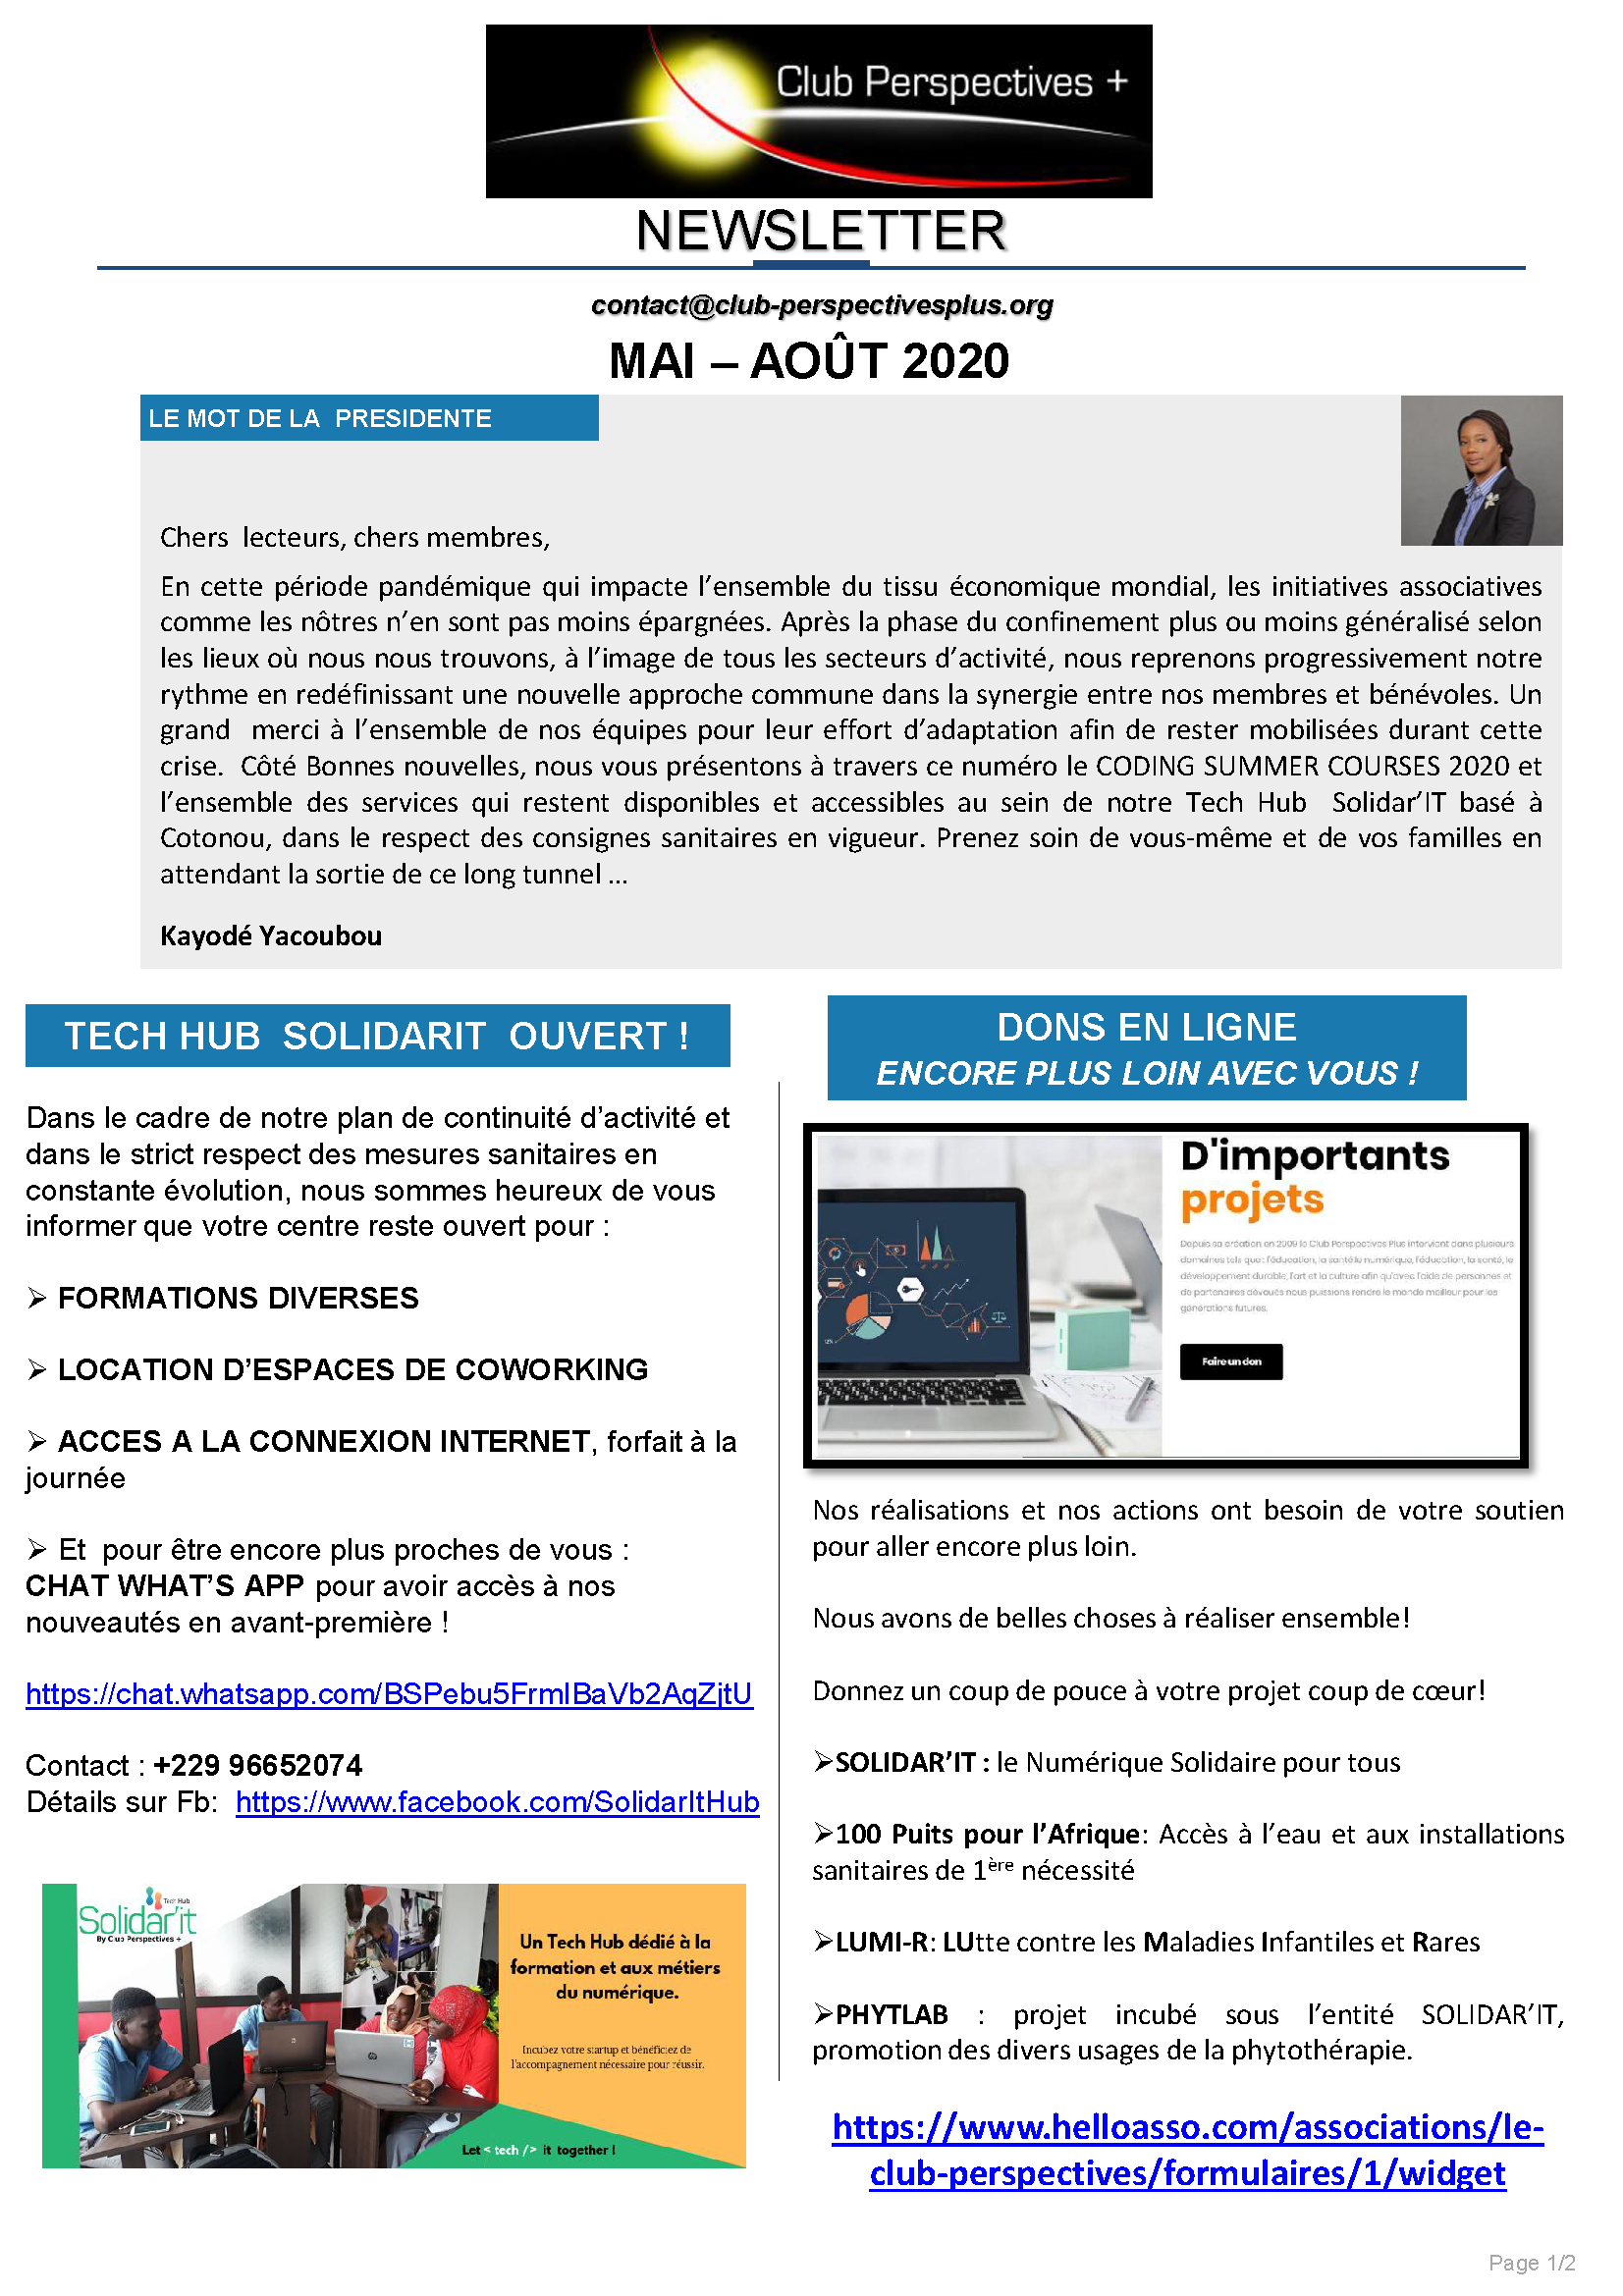 newsletter cpmai aot 2020 page 1